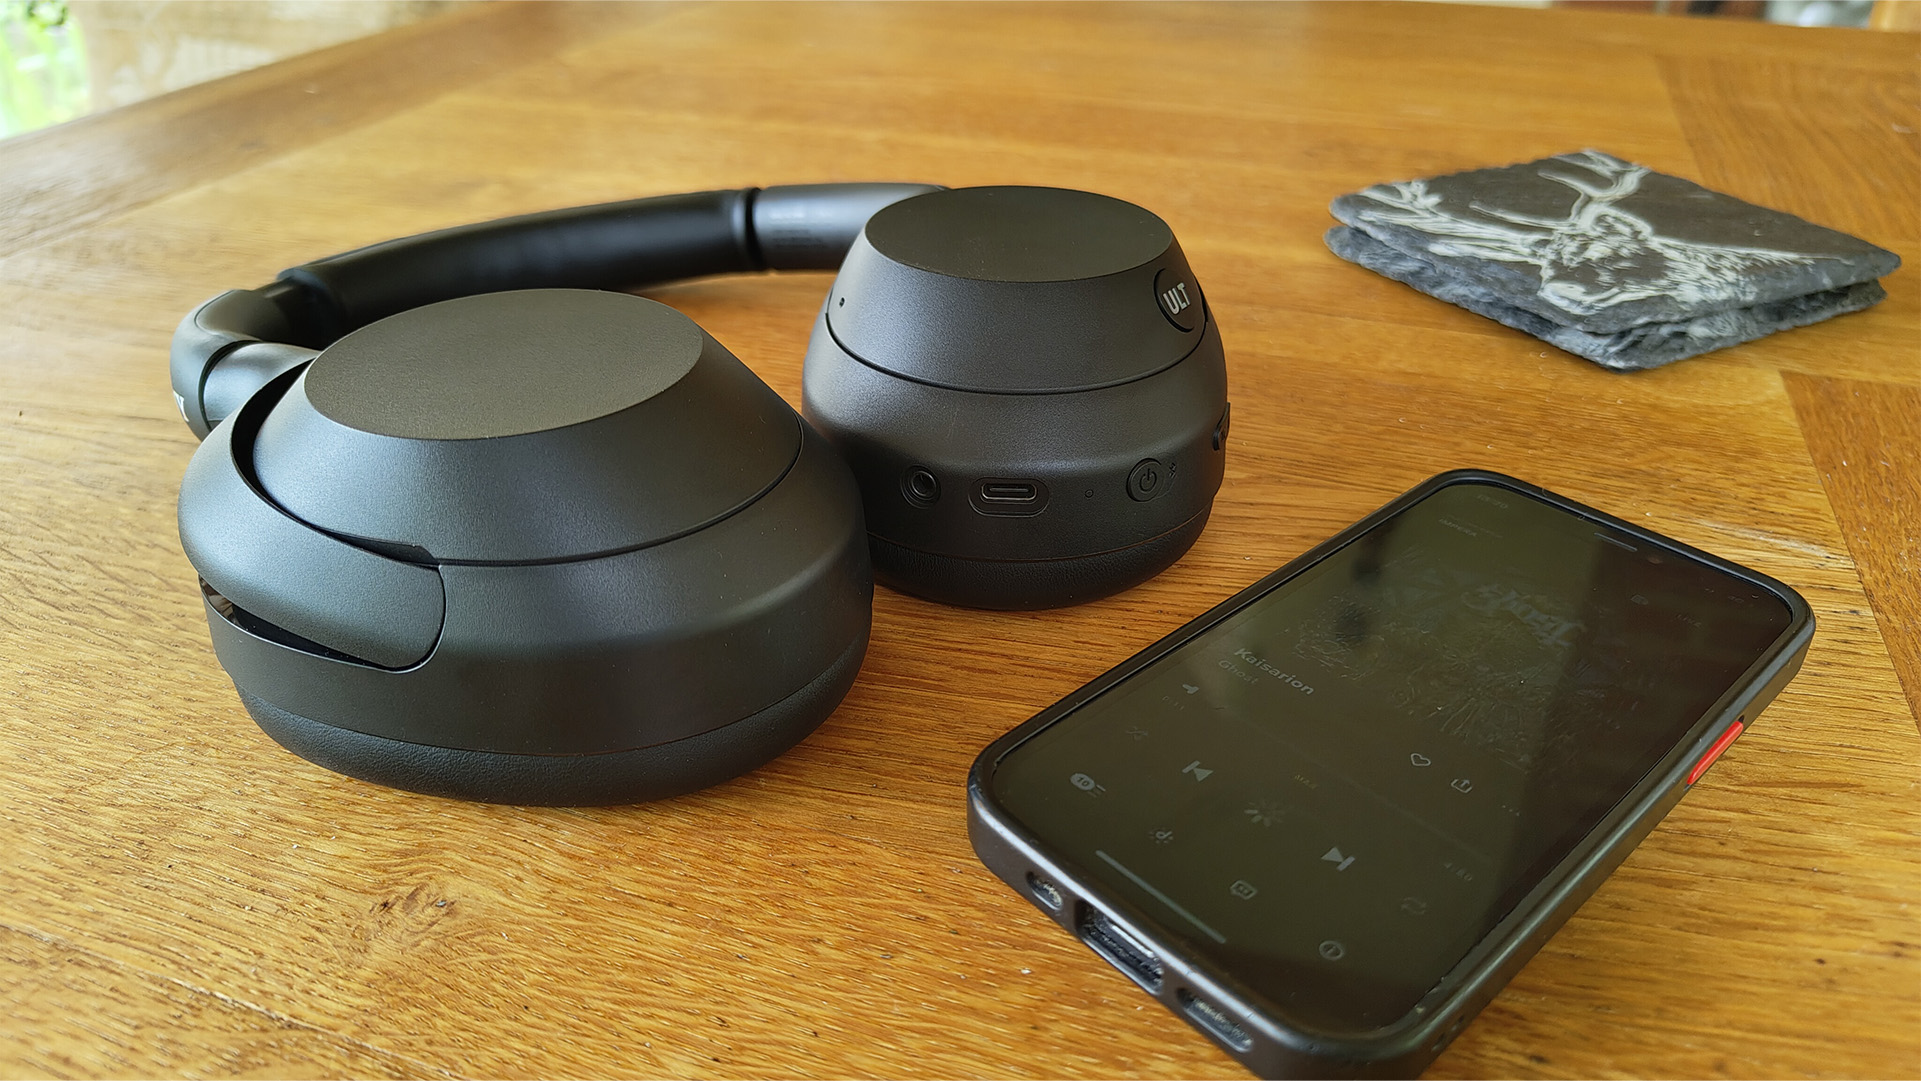 Sony ULT Wear over-ear headphones on wooden table next to smartphone